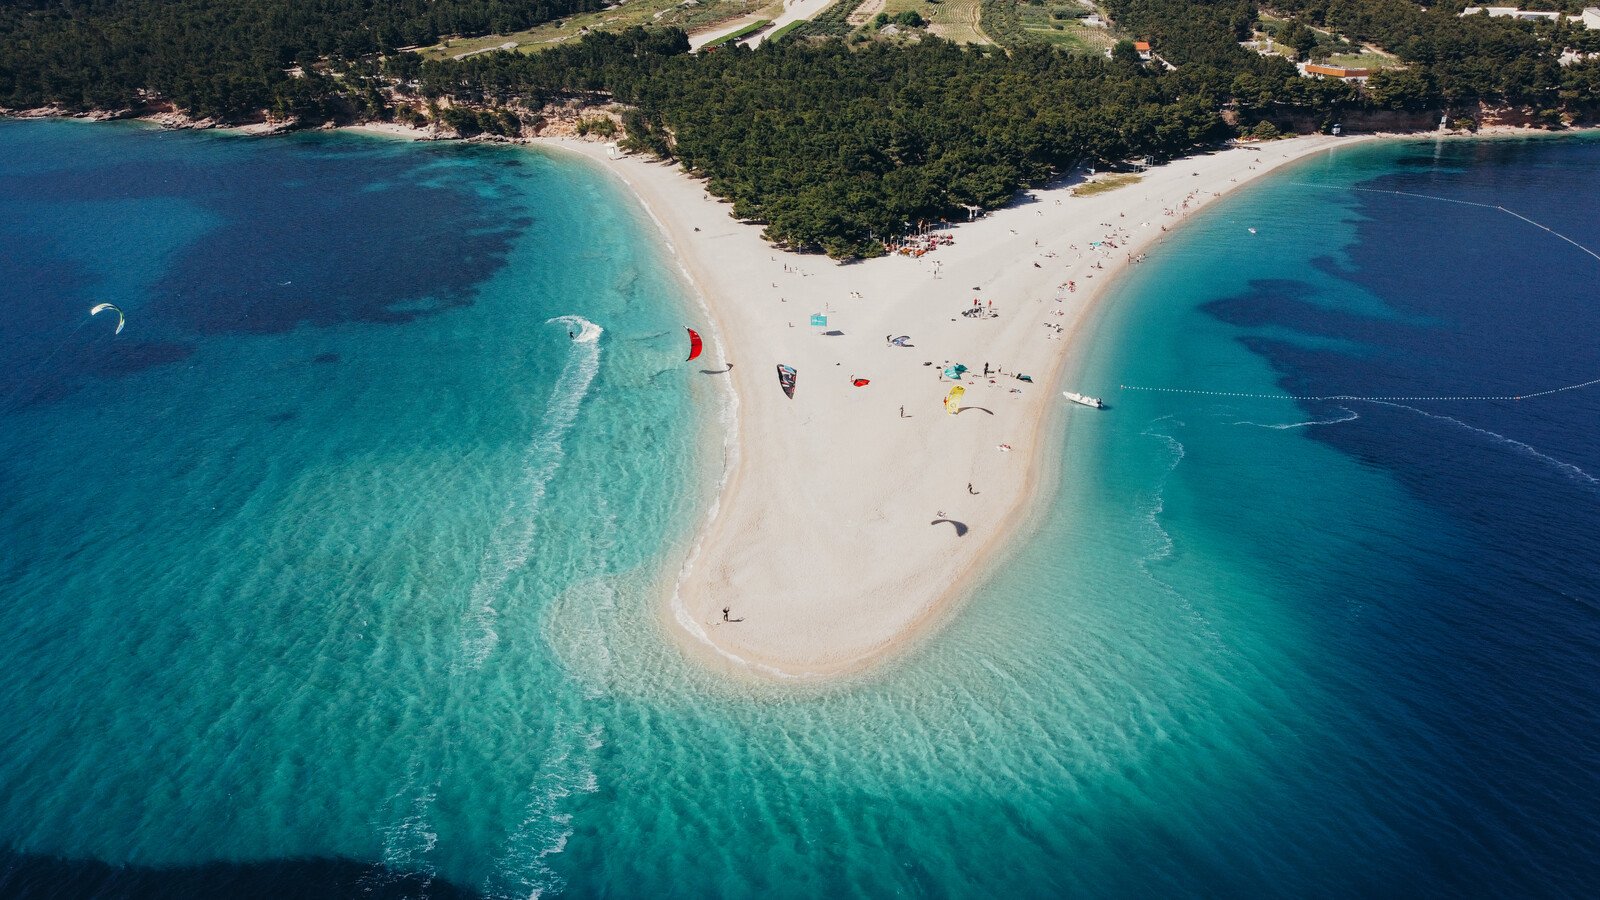 a sand bar beach jutting out from the coast into turquoise blue water with wind surfers visible